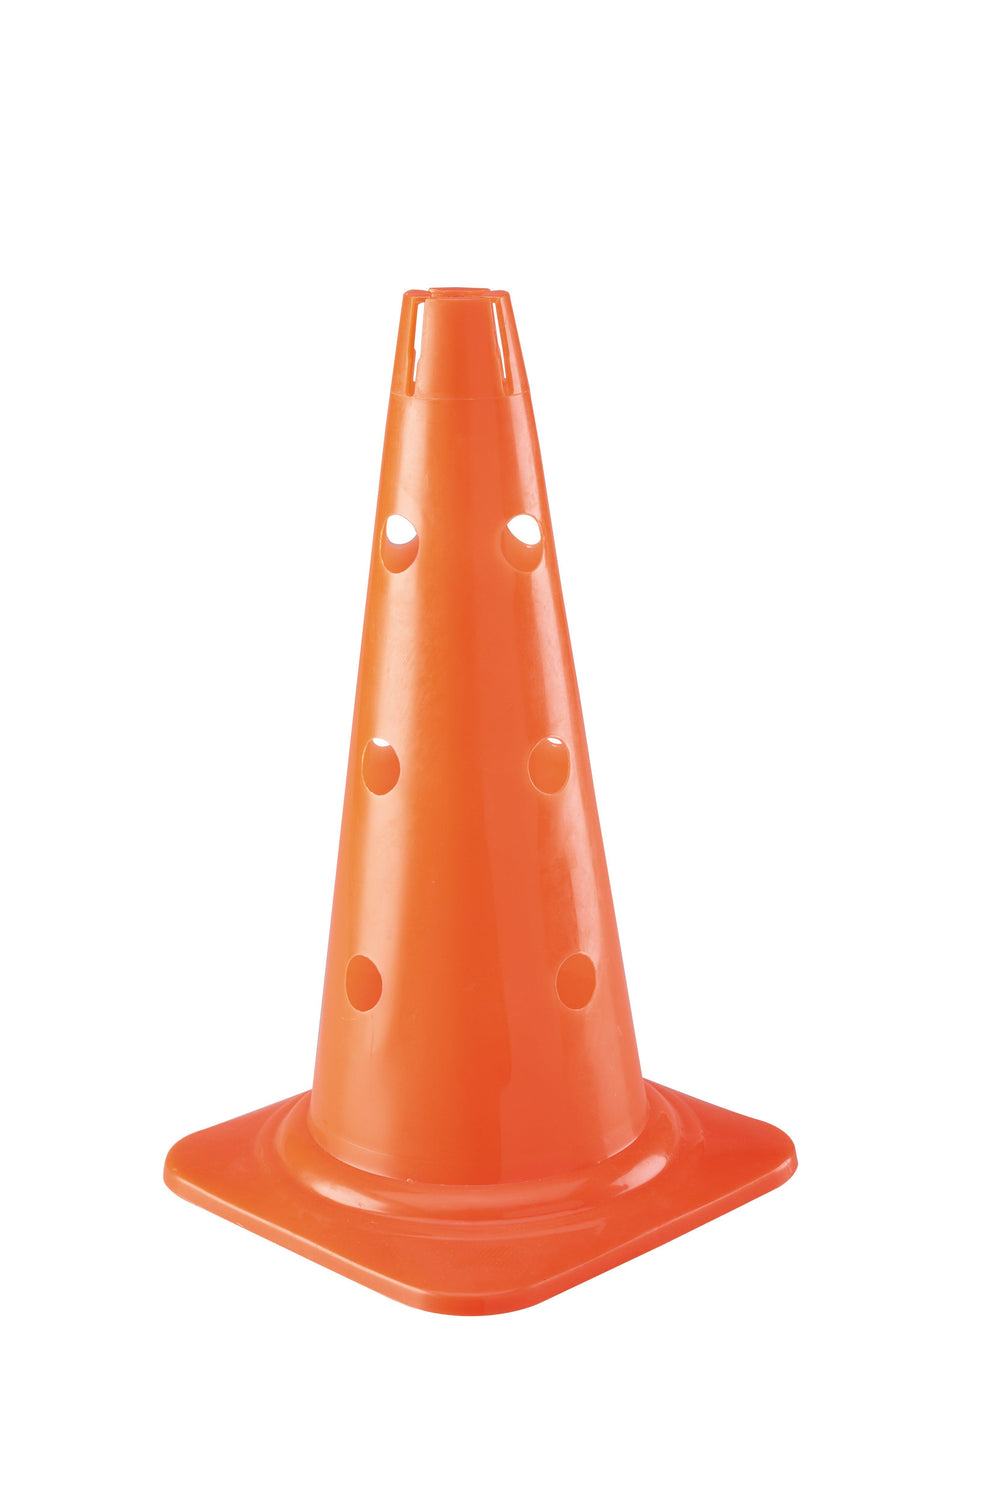 OBSTACLE CONE - Marcotte Sports Inc